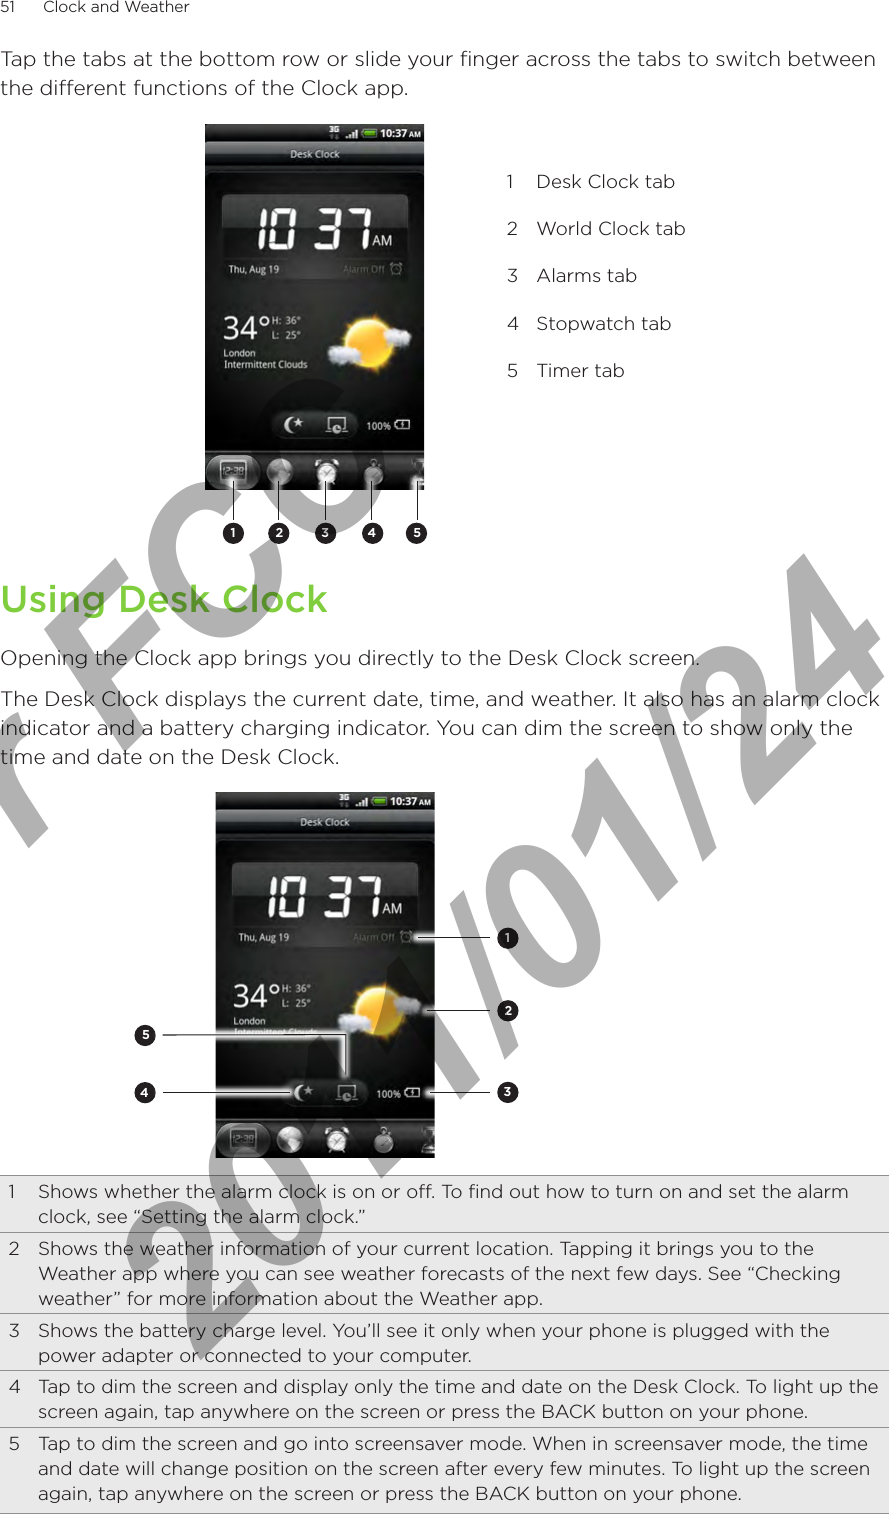 51      Clock and Weather      Tap the tabs at the bottom row or slide your finger across the tabs to switch between the different functions of the Clock app.2 3 4511  Desk Clock tab2  World Clock tab3  Alarms tab4  Stopwatch tab5  Timer tabUsing Desk ClockOpening the Clock app brings you directly to the Desk Clock screen.The Desk Clock displays the current date, time, and weather. It also has an alarm clock indicator and a battery charging indicator. You can dim the screen to show only the time and date on the Desk Clock.234511  Shows whether the alarm clock is on or off. To find out how to turn on and set the alarm clock, see “Setting the alarm clock.”2  Shows the weather information of your current location. Tapping it brings you to the Weather app where you can see weather forecasts of the next few days. See “Checking weather” for more information about the Weather app.3  Shows the battery charge level. You’ll see it only when your phone is plugged with the power adapter or connected to your computer.4  Tap to dim the screen and display only the time and date on the Desk Clock. To light up the screen again, tap anywhere on the screen or press the BACK button on your phone.5  Tap to dim the screen and go into screensaver mode. When in screensaver mode, the time and date will change position on the screen after every few minutes. To light up the screen again, tap anywhere on the screen or press the BACK button on your phone.For FCC  2011/01/24